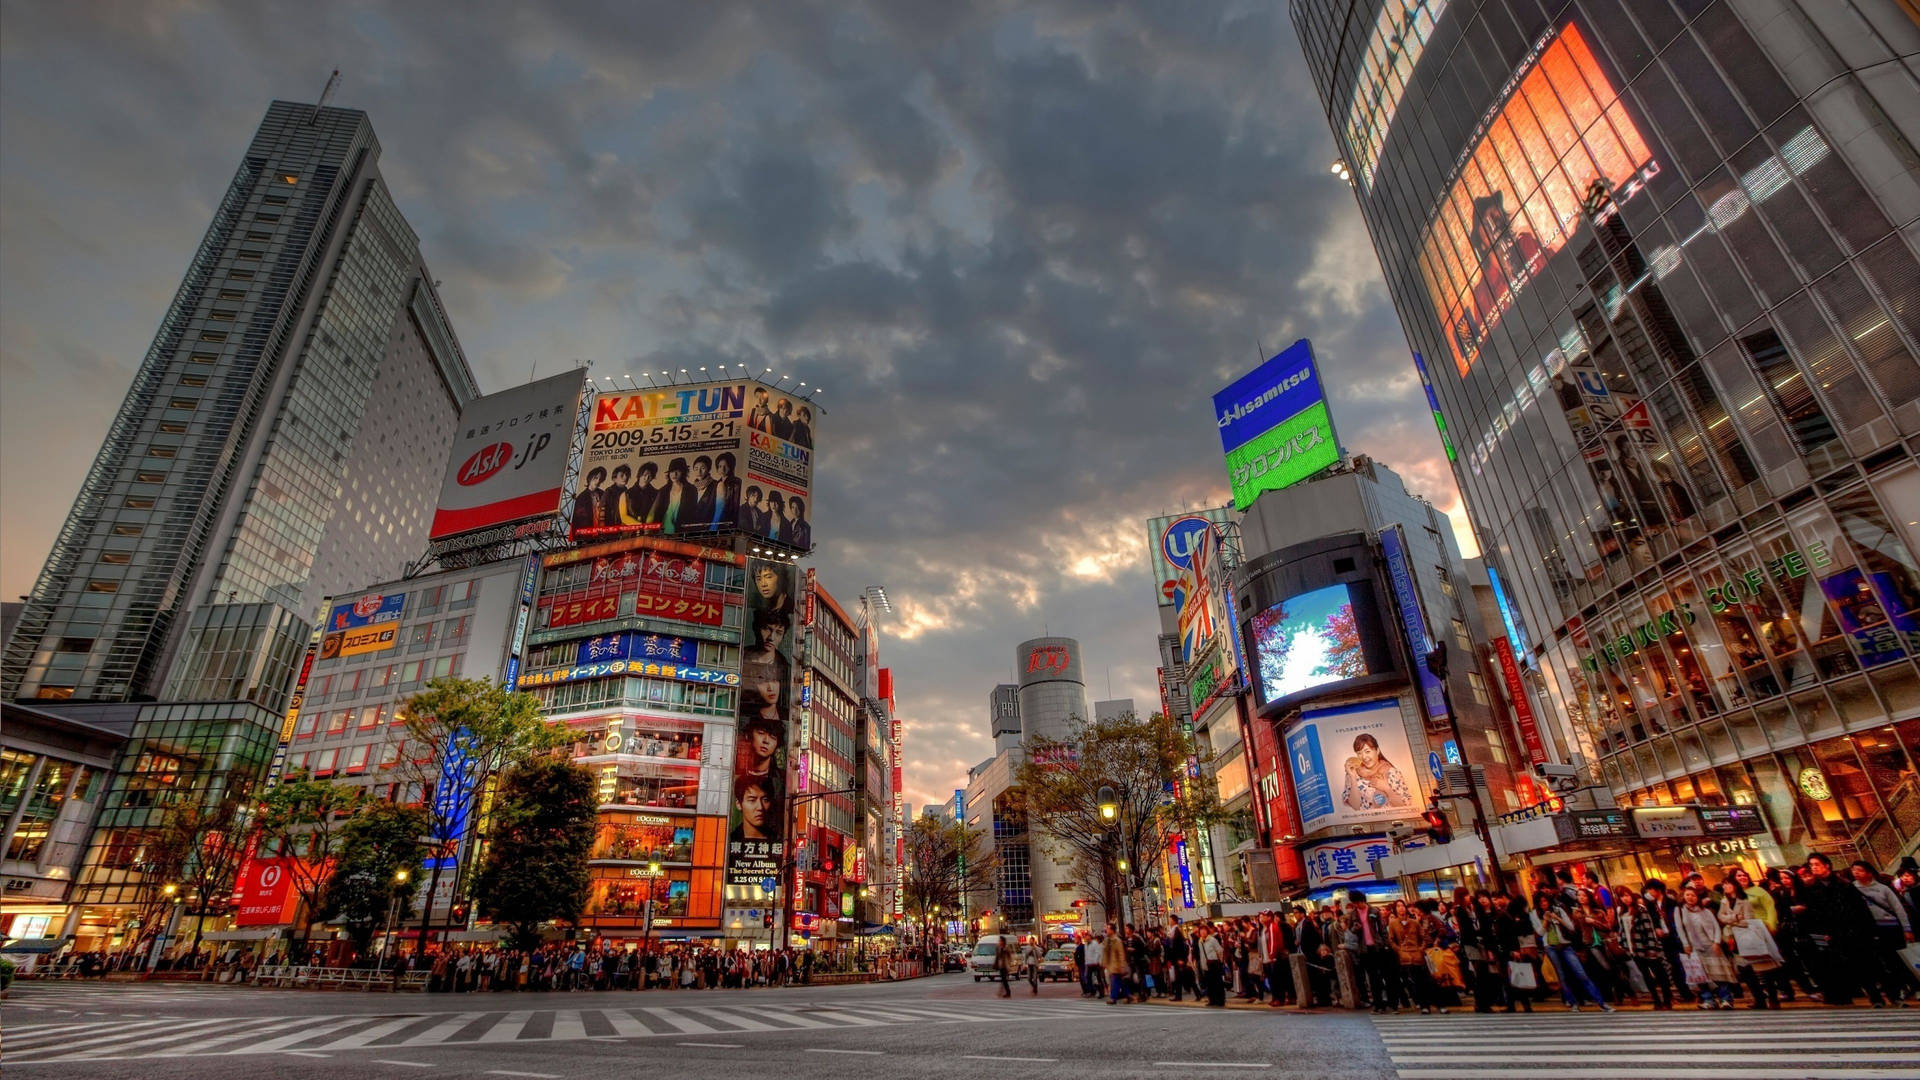 The hustle and bustle of Shibuya Crossing at sunset in Tokyo, Japan Wallpaper